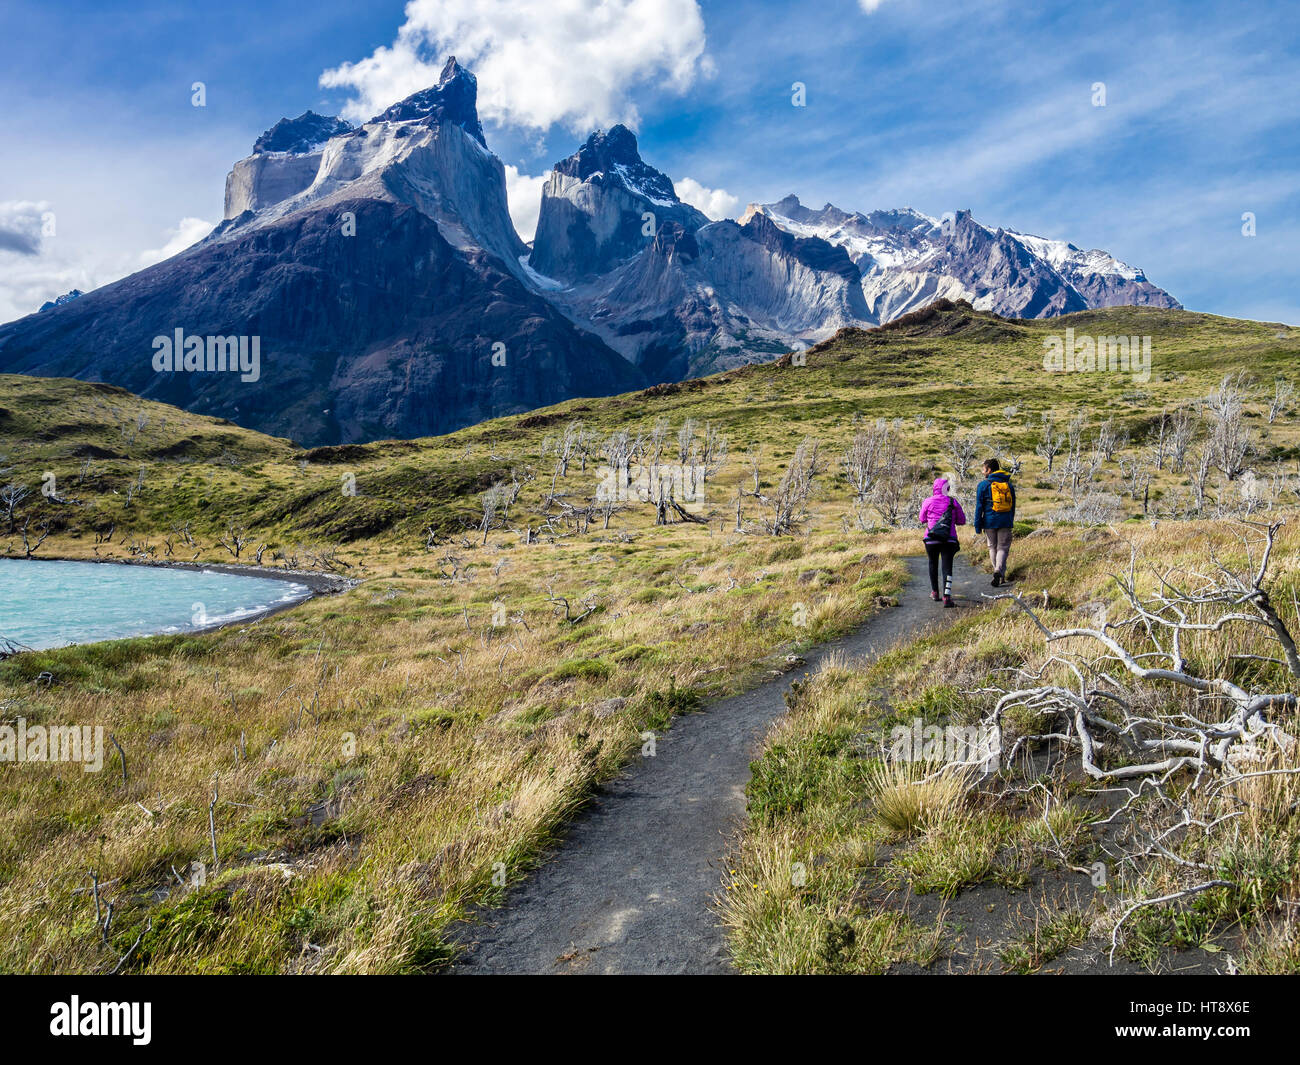 Hikers on small path to viewpoint Mirador Cuernos at lake Nordenskjöld,   burned trees,  Torres del Paine national park, Chile Stock Photo